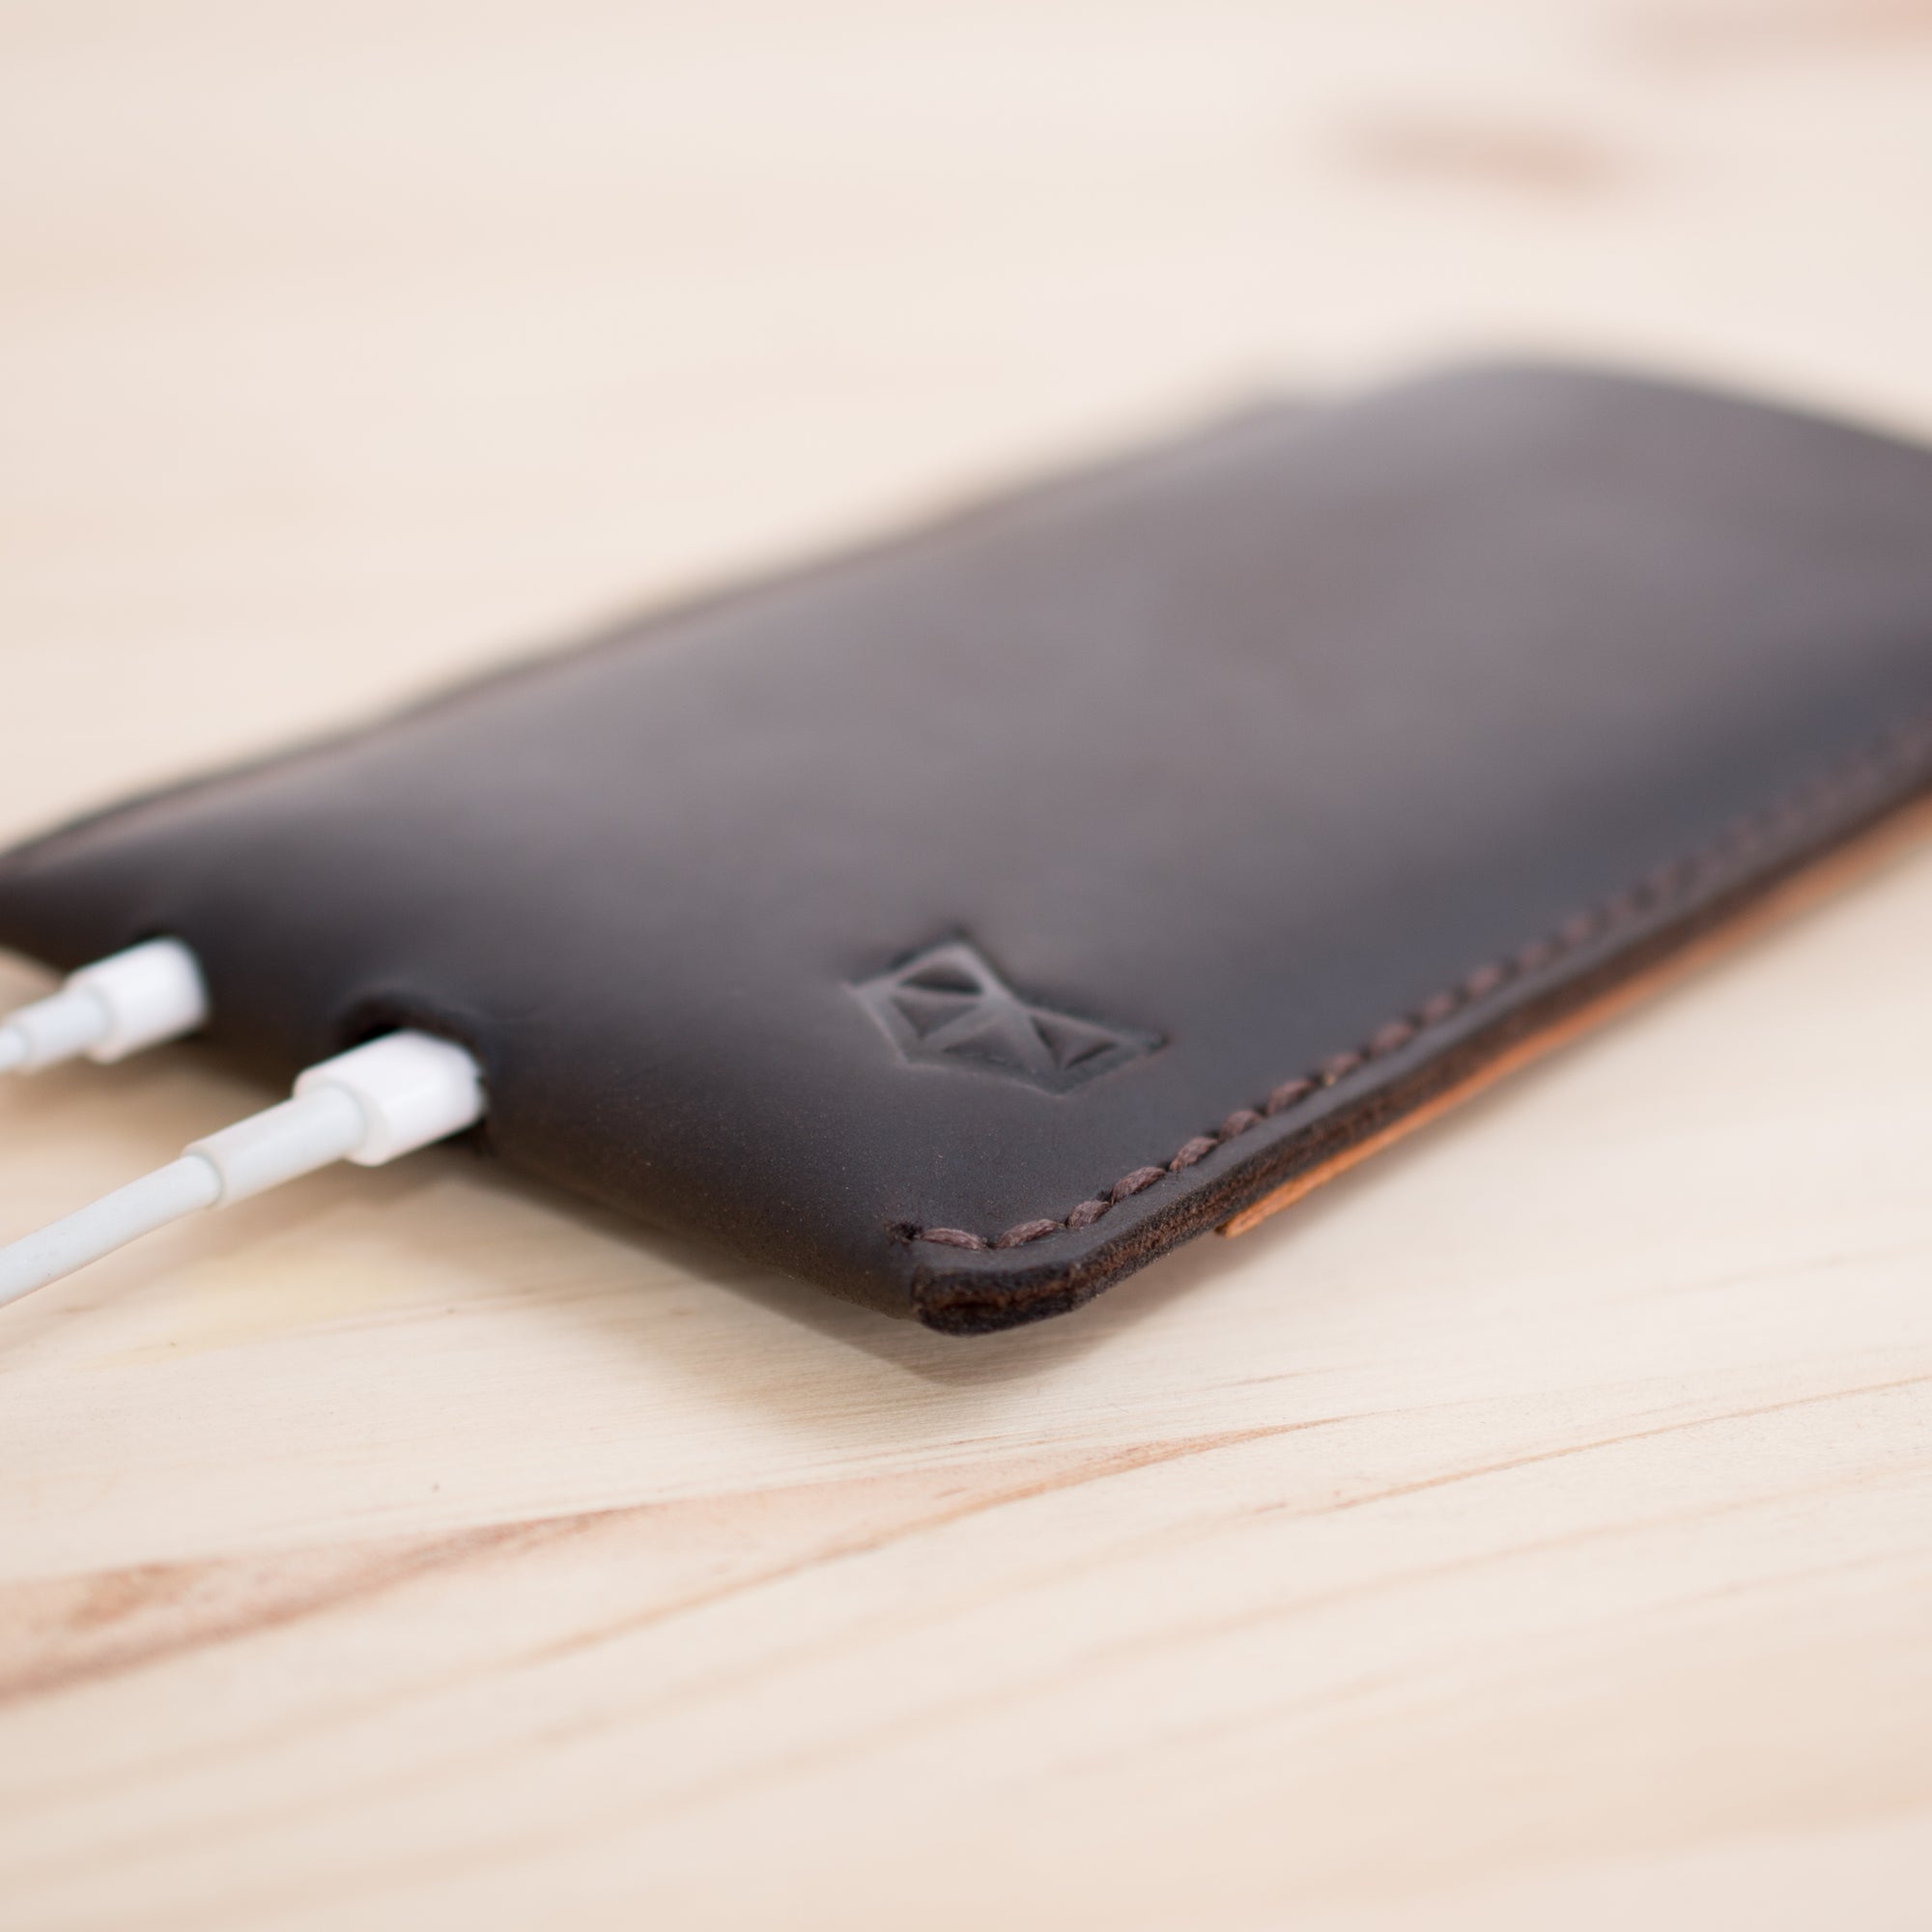 Charging cable and earphones holes from a Handmade iPhone case  leather wallet for iPhone 8 Plus, iPhone x, iPhone 10,